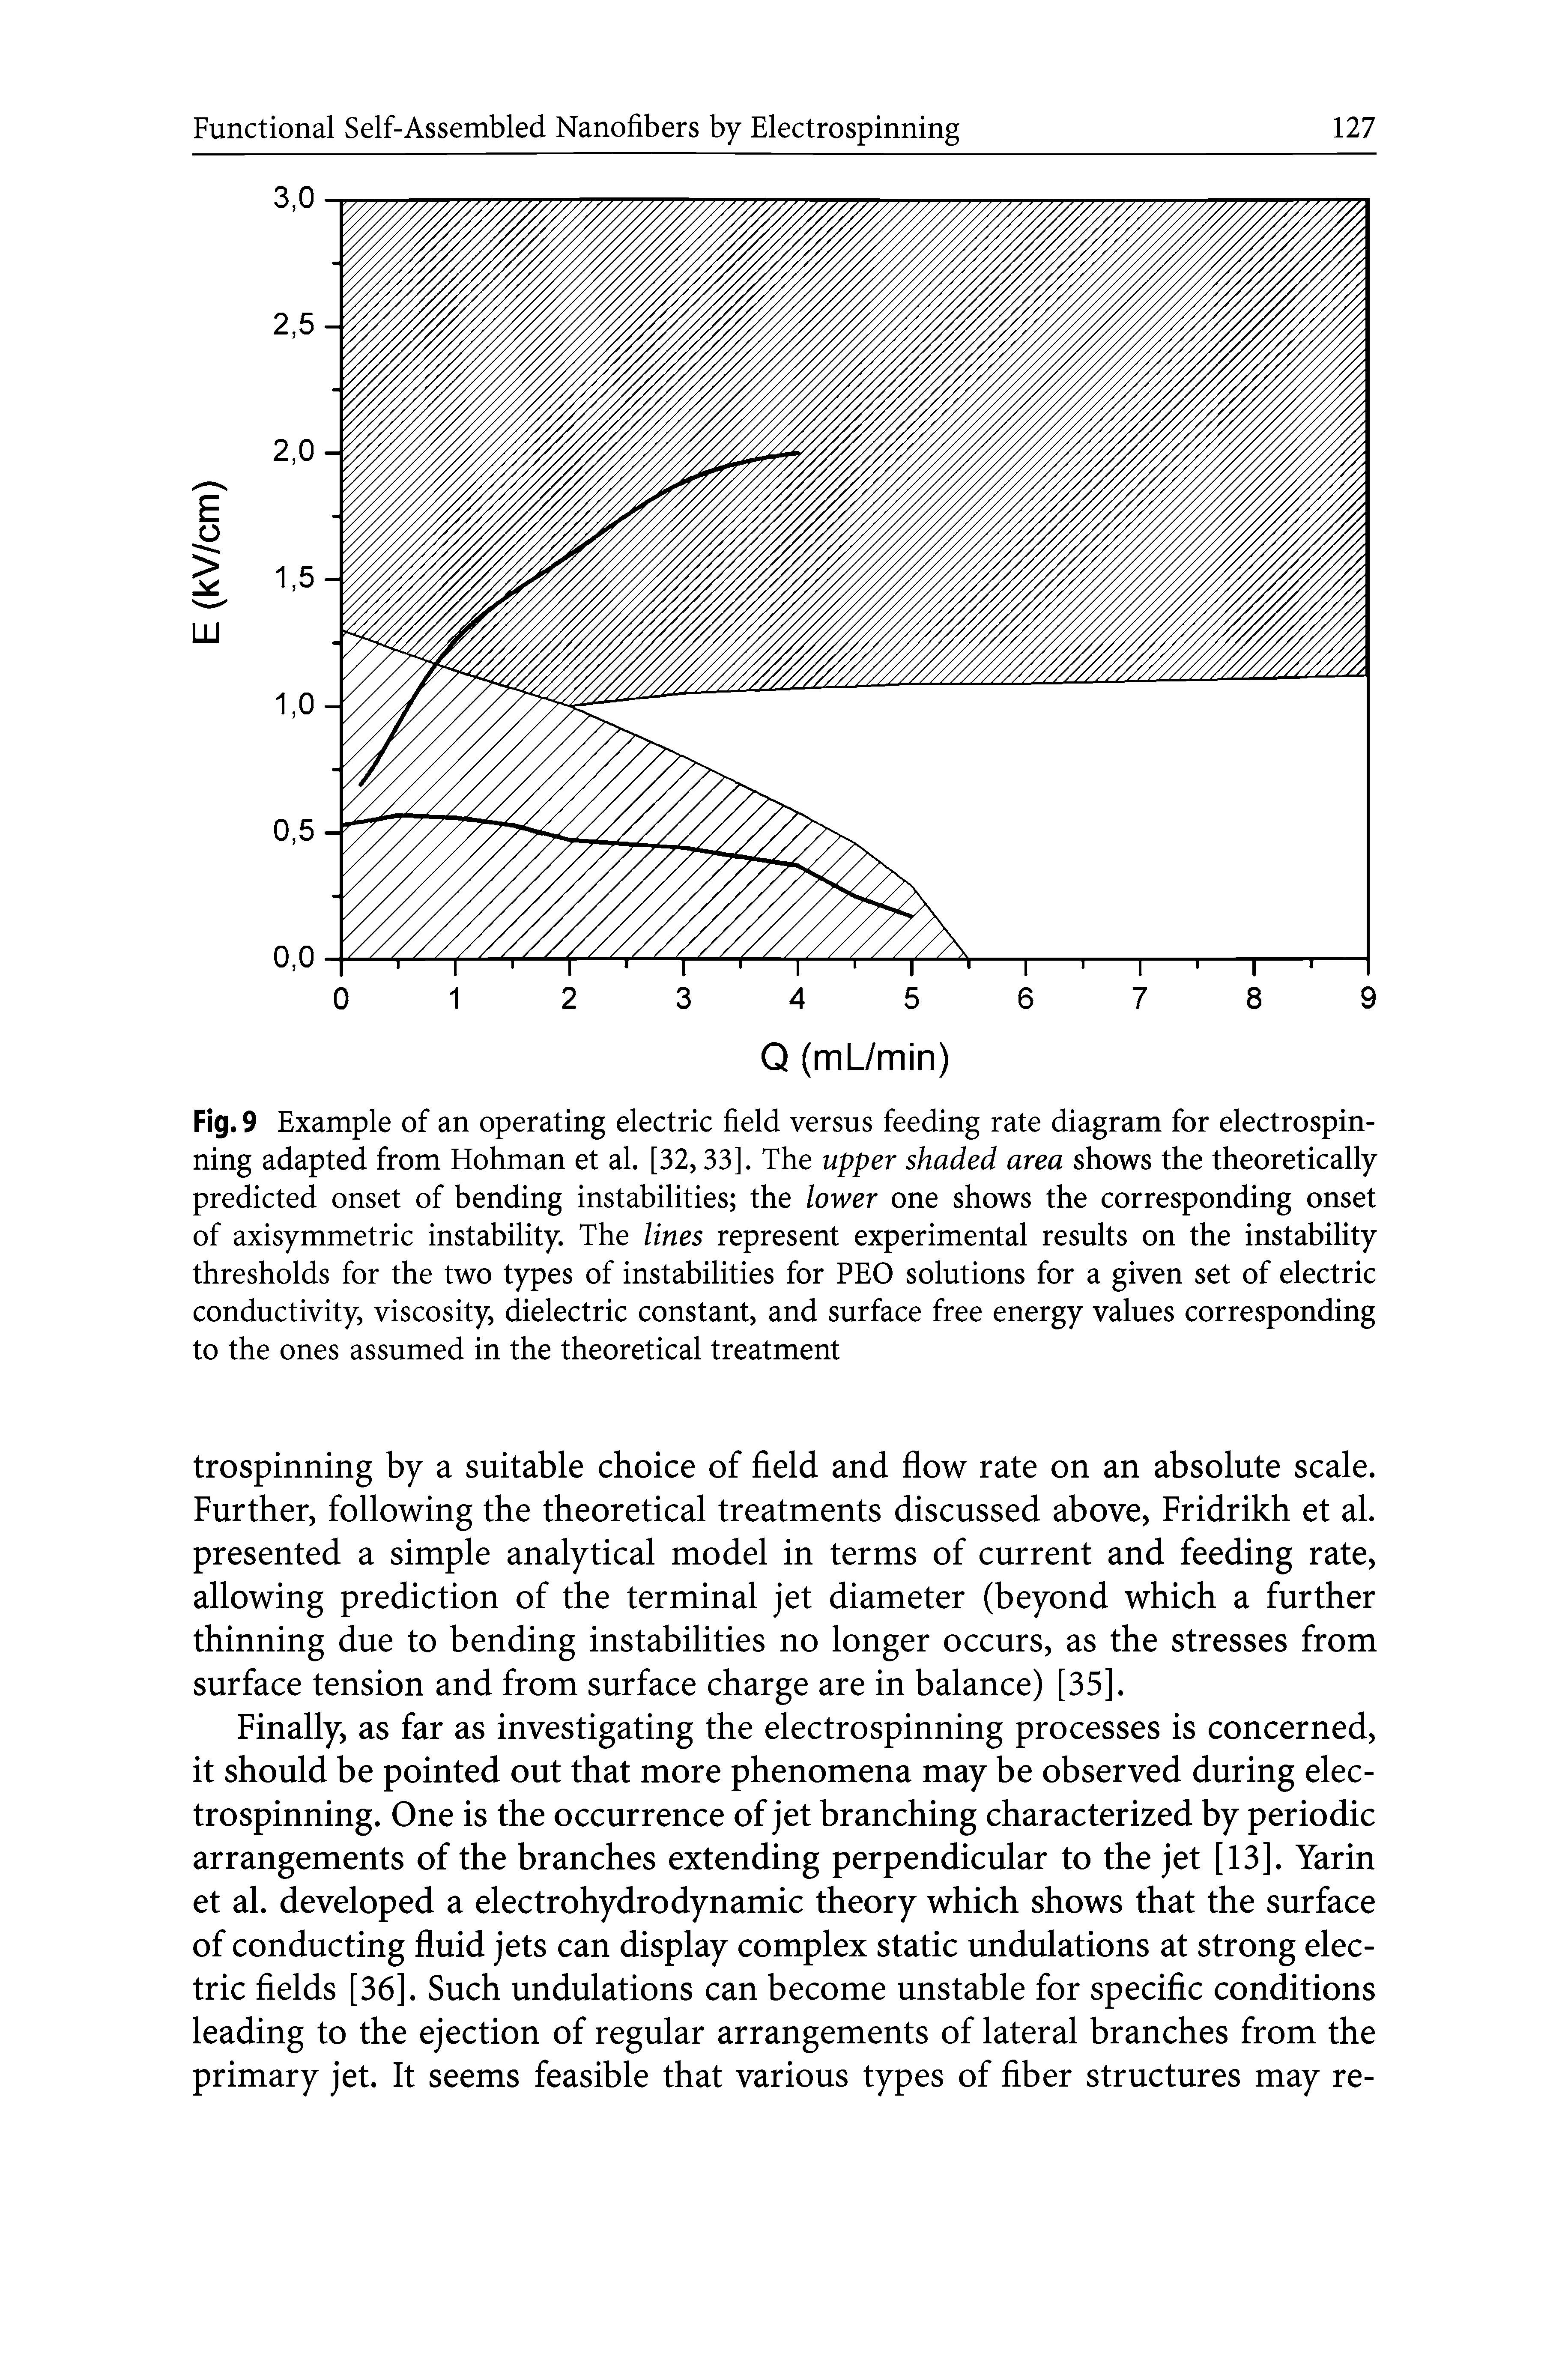 Fig. 9 Example of an operating electric field versus feeding rate diagram for electrospinning adapted from Hohman et al. [32,33]. The upper shaded area shows the theoretically predicted onset of bending instabilities the lower one shows the corresponding onset of axisymmetric instability. The lines represent experimental results on the instability thresholds for the two types of instabilities for PEO solutions for a given set of electric conductivity, viscosity, dielectric constant, and surface free energy values corresponding to the ones assumed in the theoretical treatment...